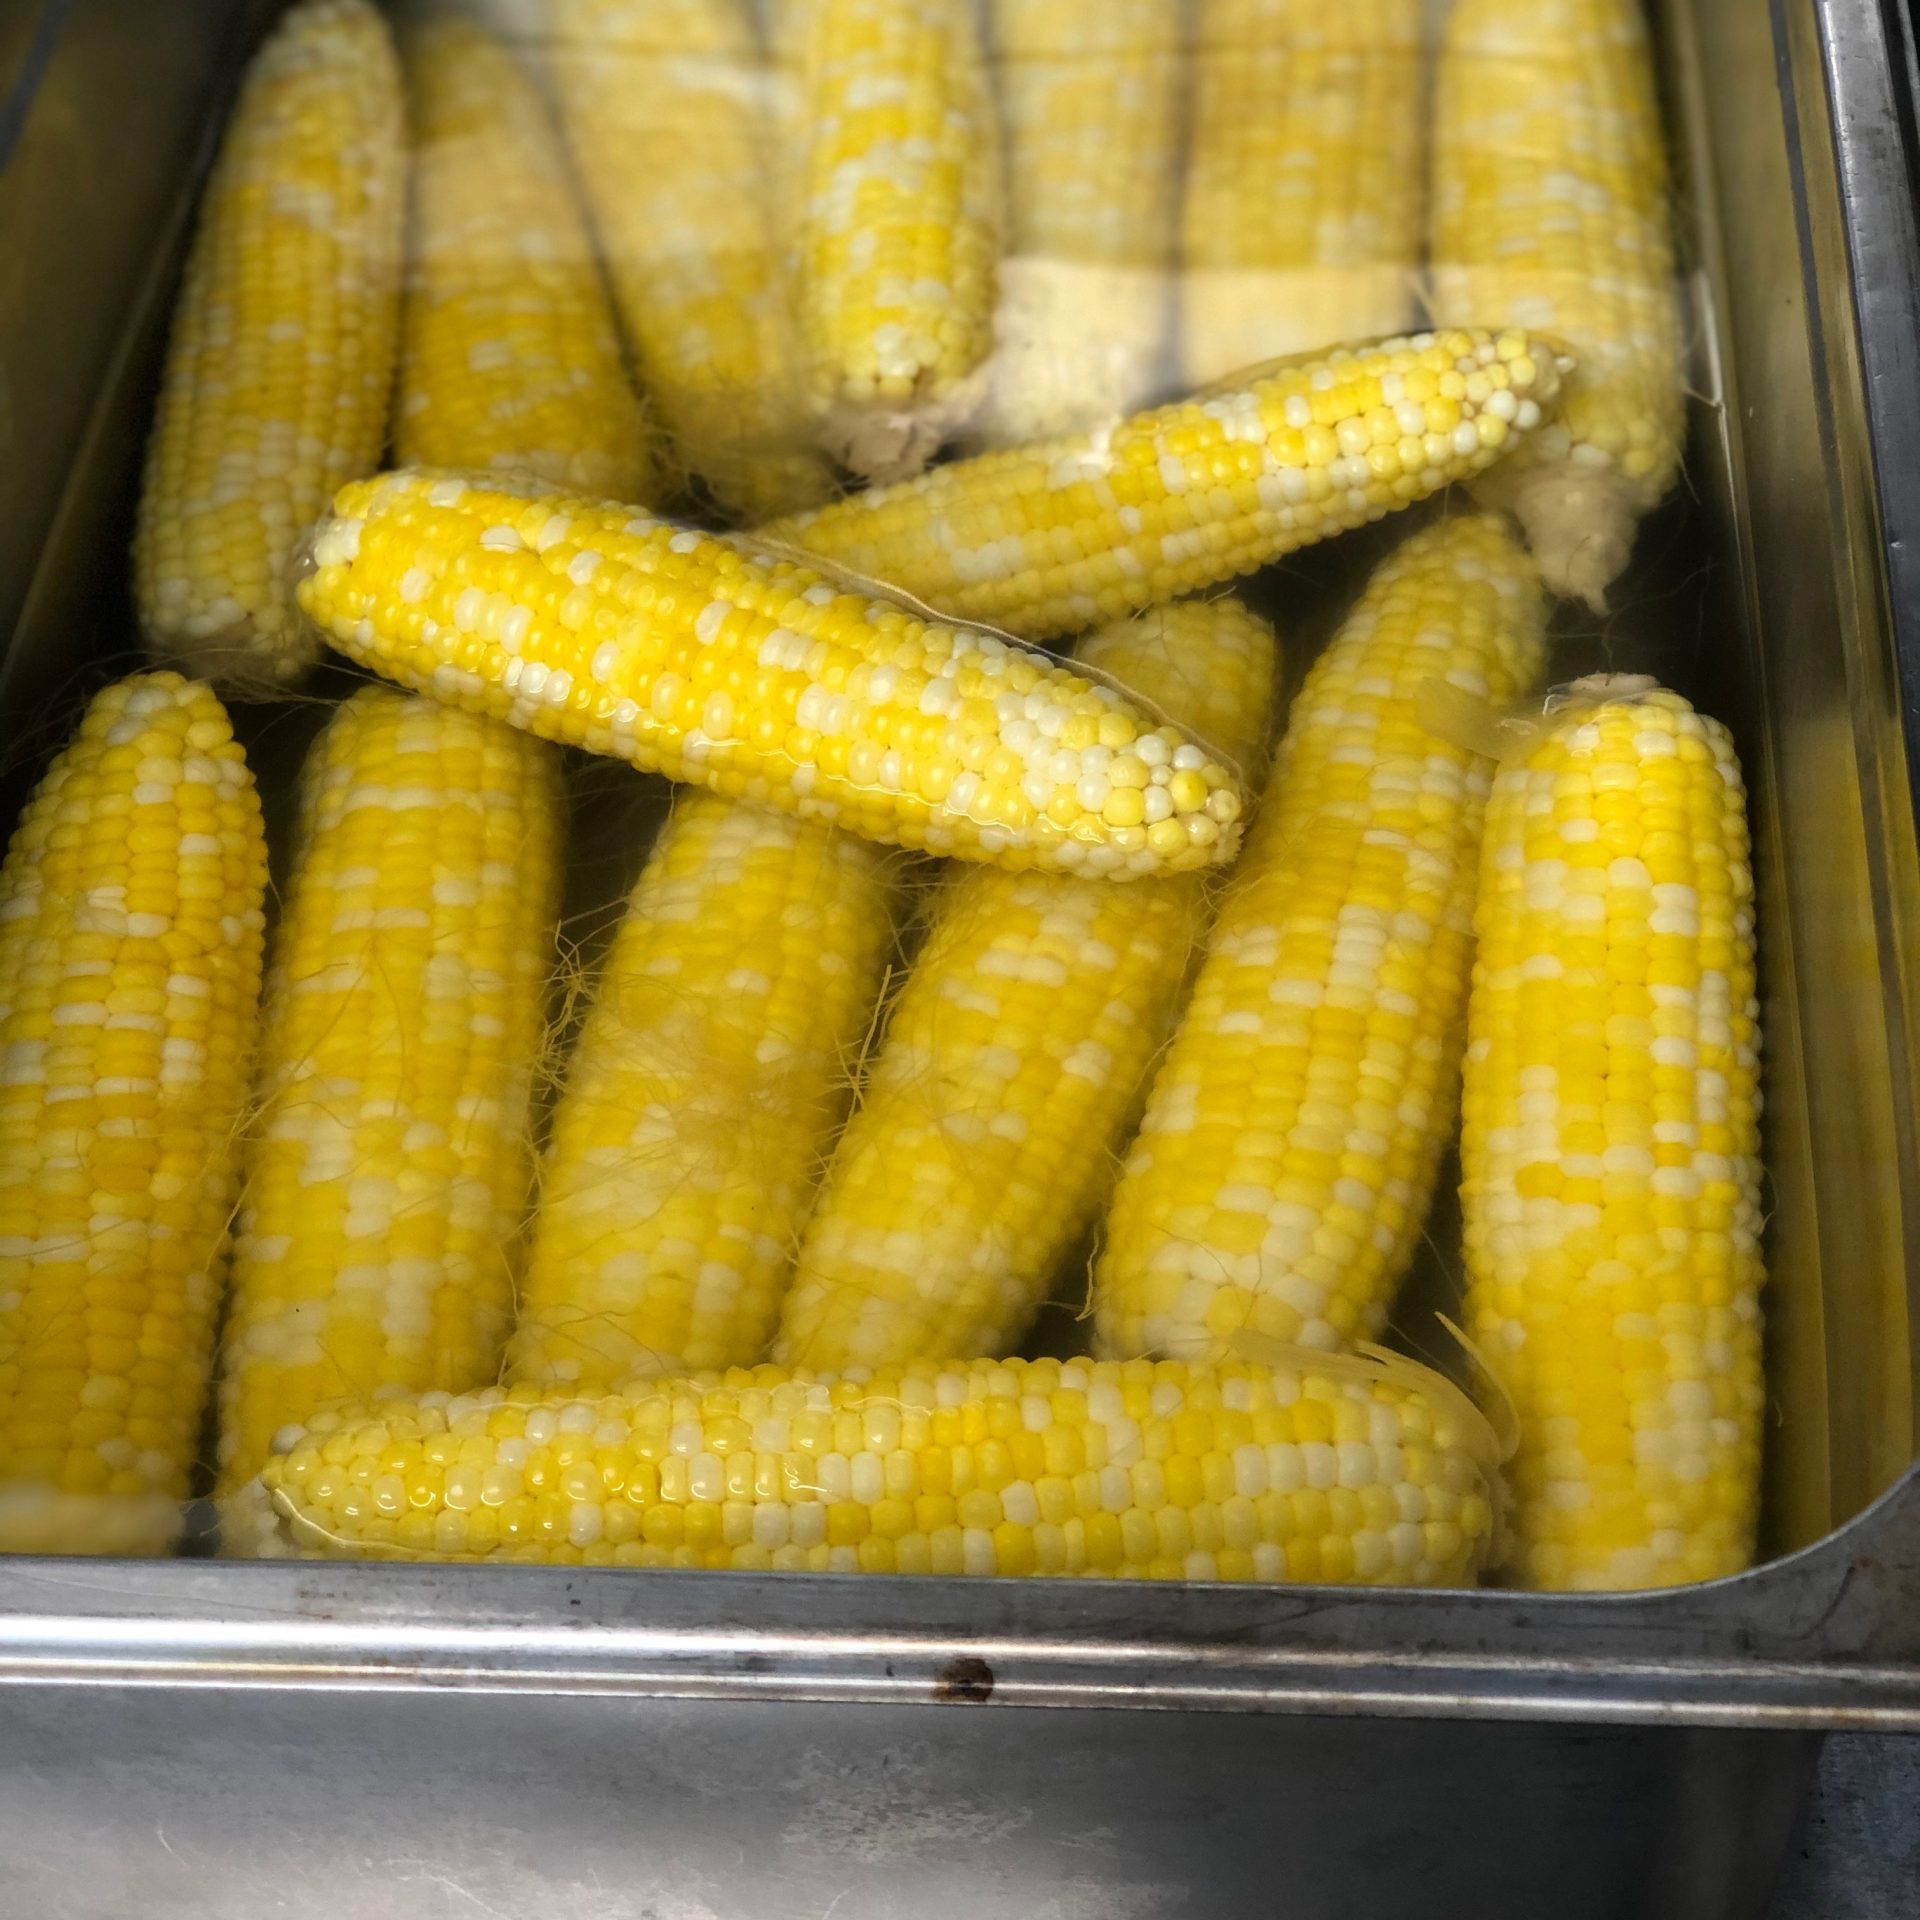 Several ears of boiled corn in a stainless steel tray.